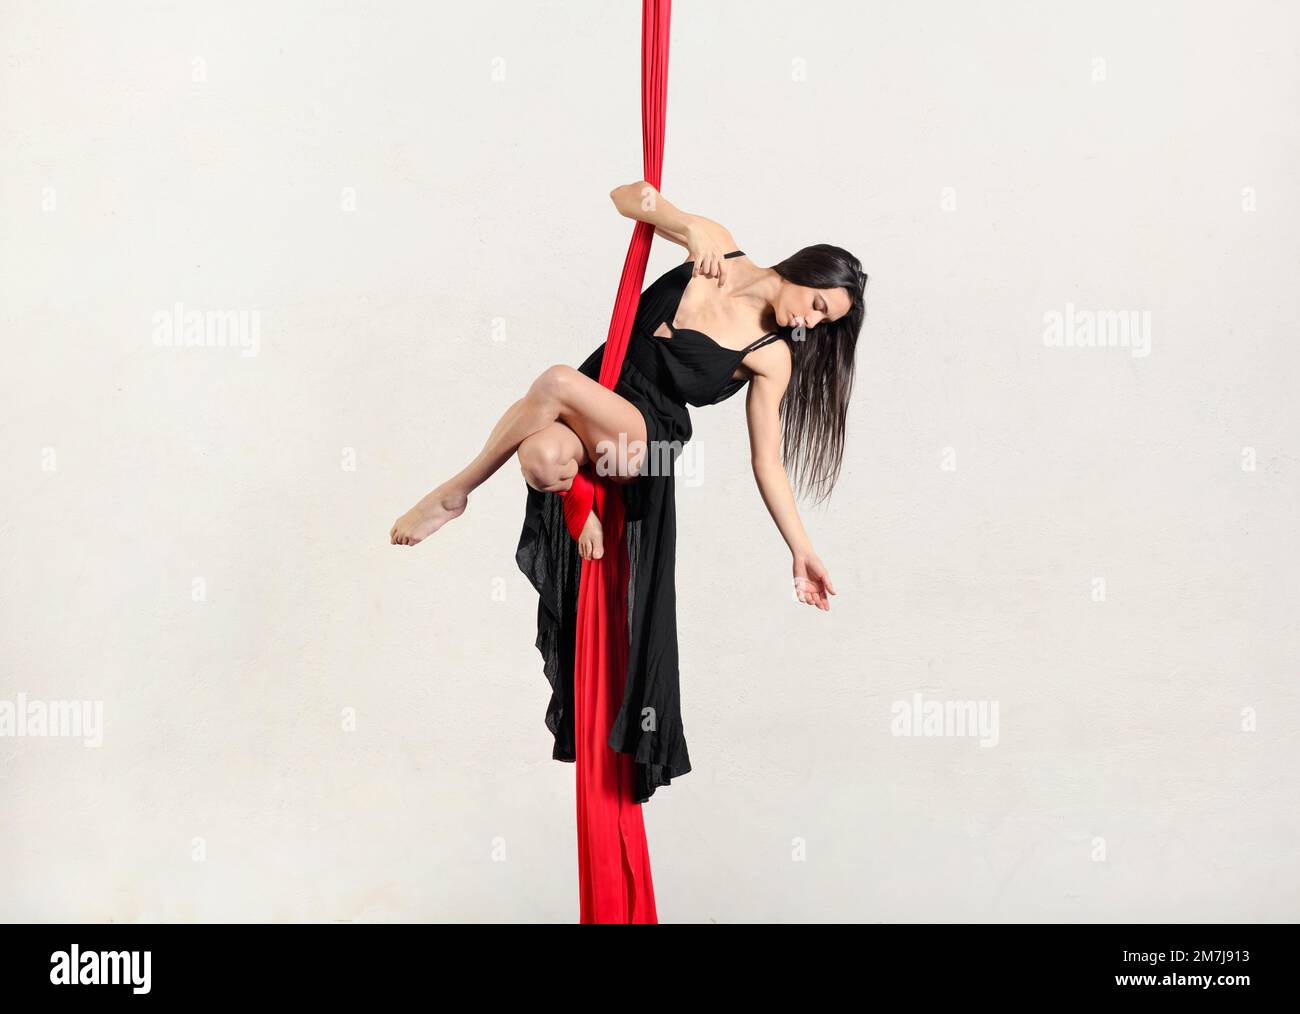 Full body of graceful female with long hair in black dress hanging on aerial red silks while doing yoga on white background Stock Photo